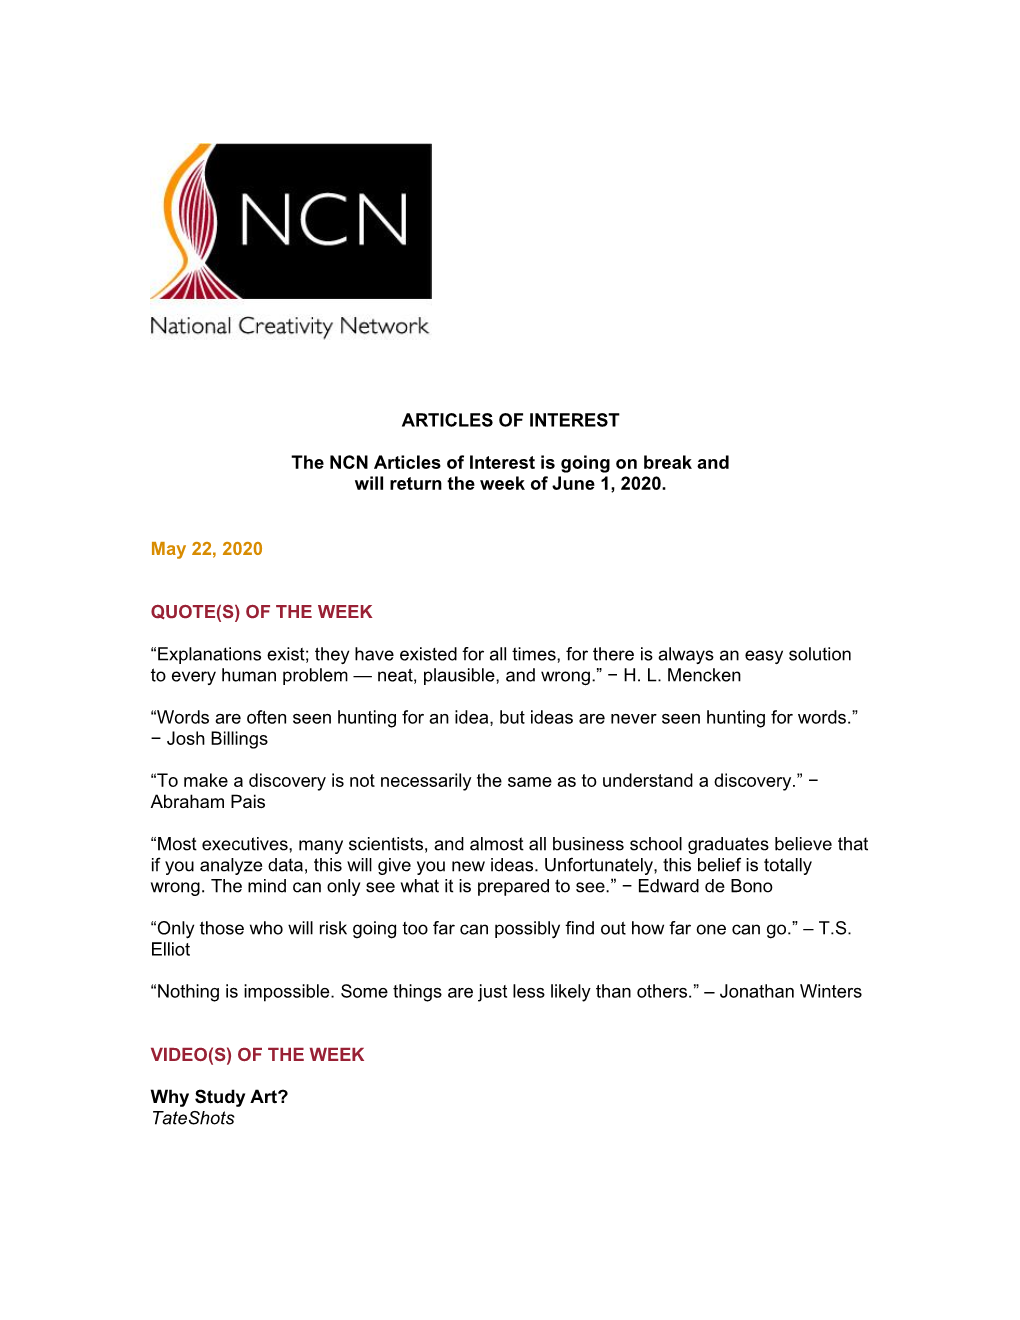 NCN Articles of Interest Is Going on Break and Will Return the Week of June 1, 2020